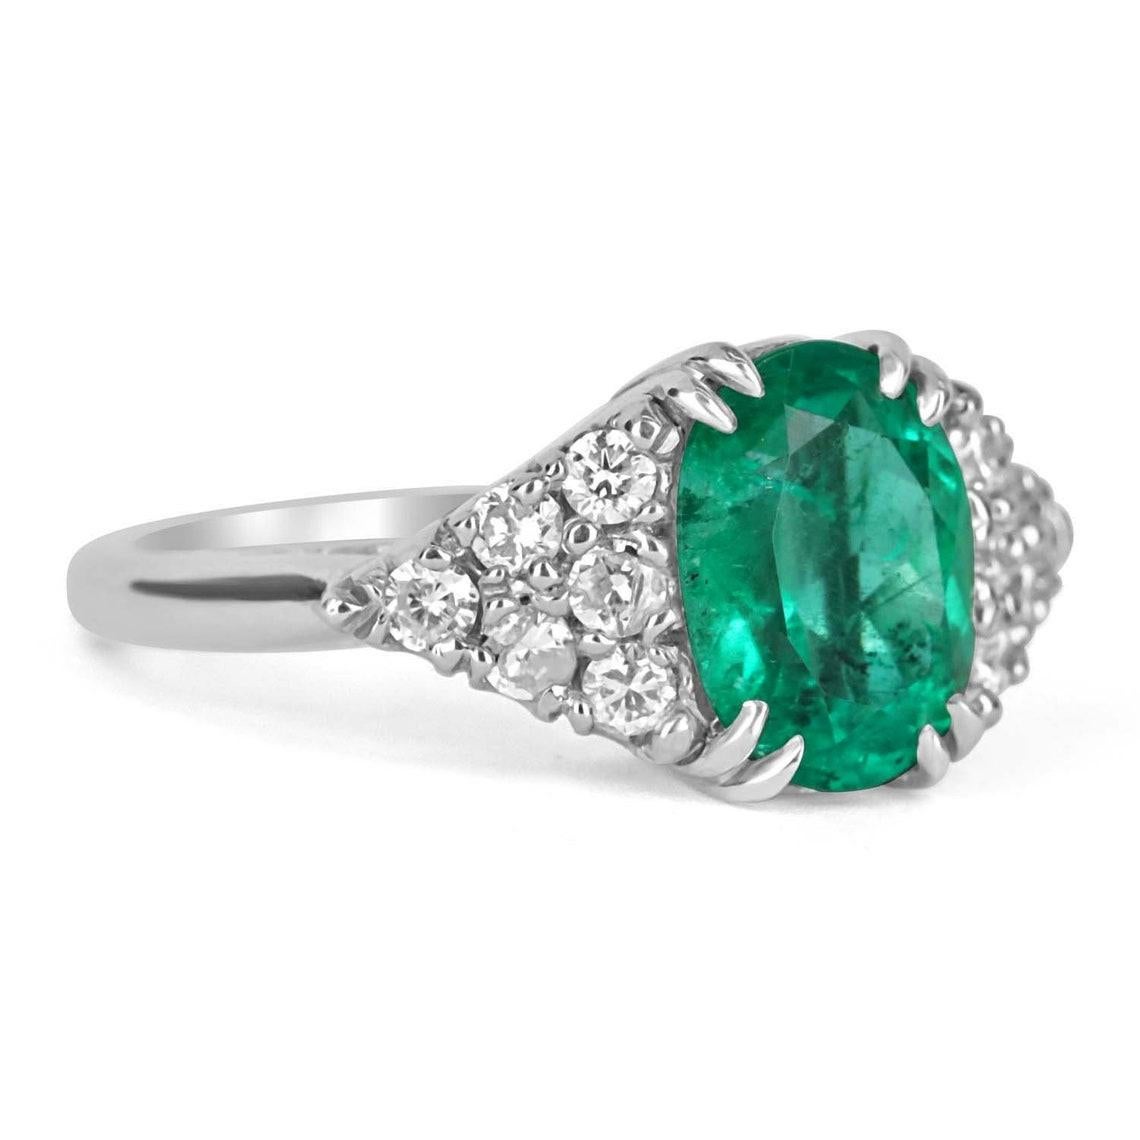 On full display, is this gorgeous Colombian emerald and diamond statement ring. The center gemstone carries almost four carats and showcases a lovely vivid green color and excellent/very good luster. The emerald has visible carbon specks and natural